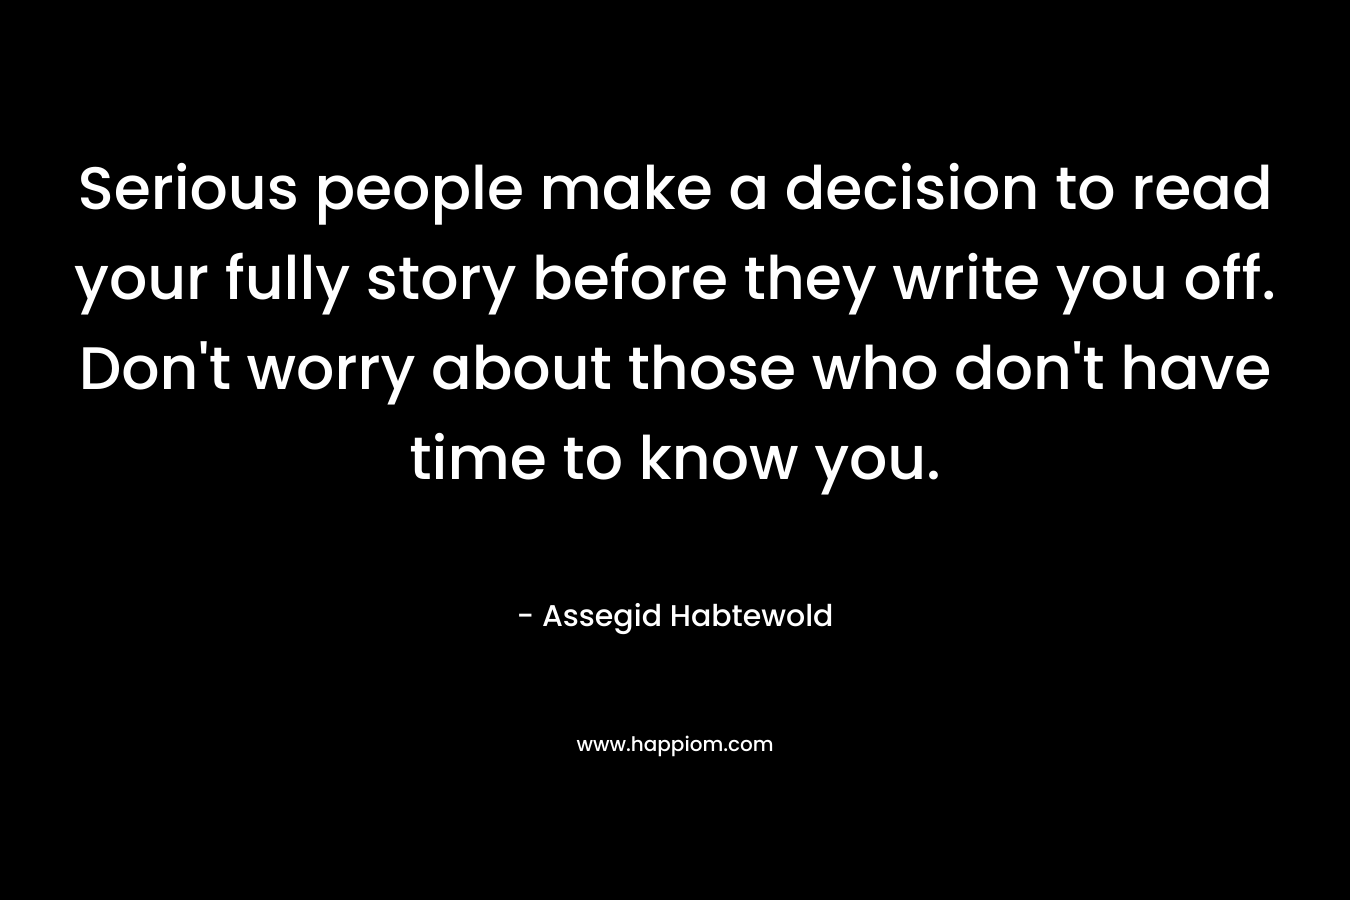 Serious people make a decision to read your fully story before they write you off. Don't worry about those who don't have time to know you.